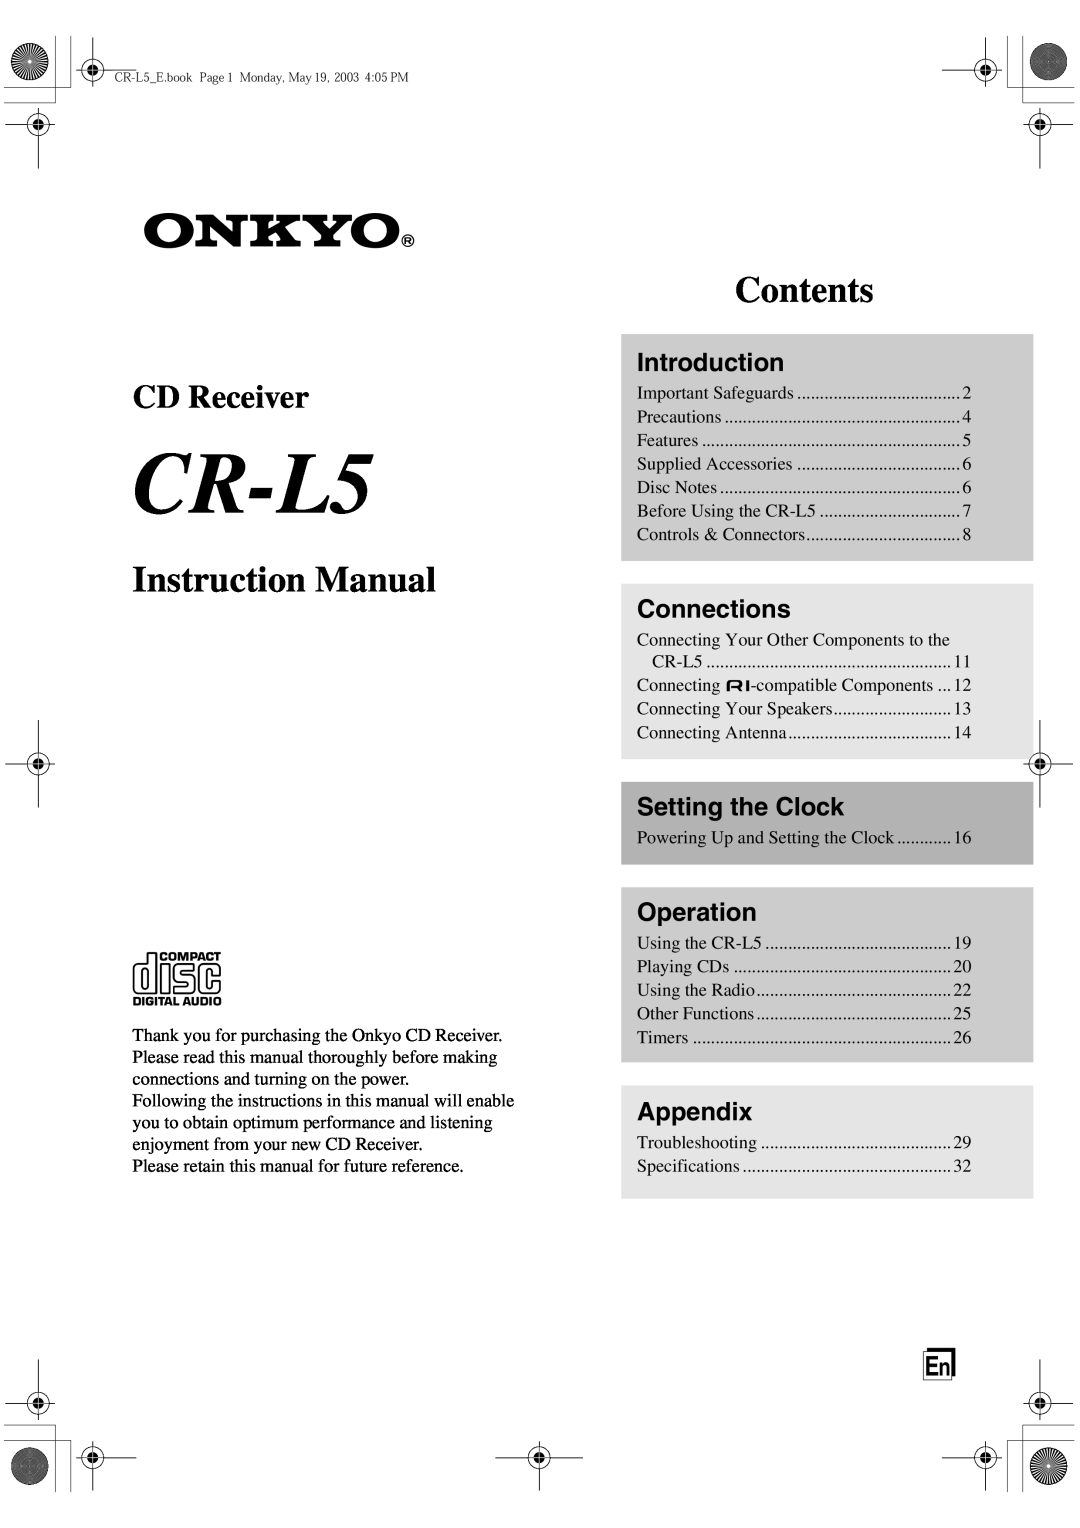 Onkyo CR-L5 instruction manual Introduction, Connections, Setting the Clock, Operation, Appendix, Contents, CD Receiver 